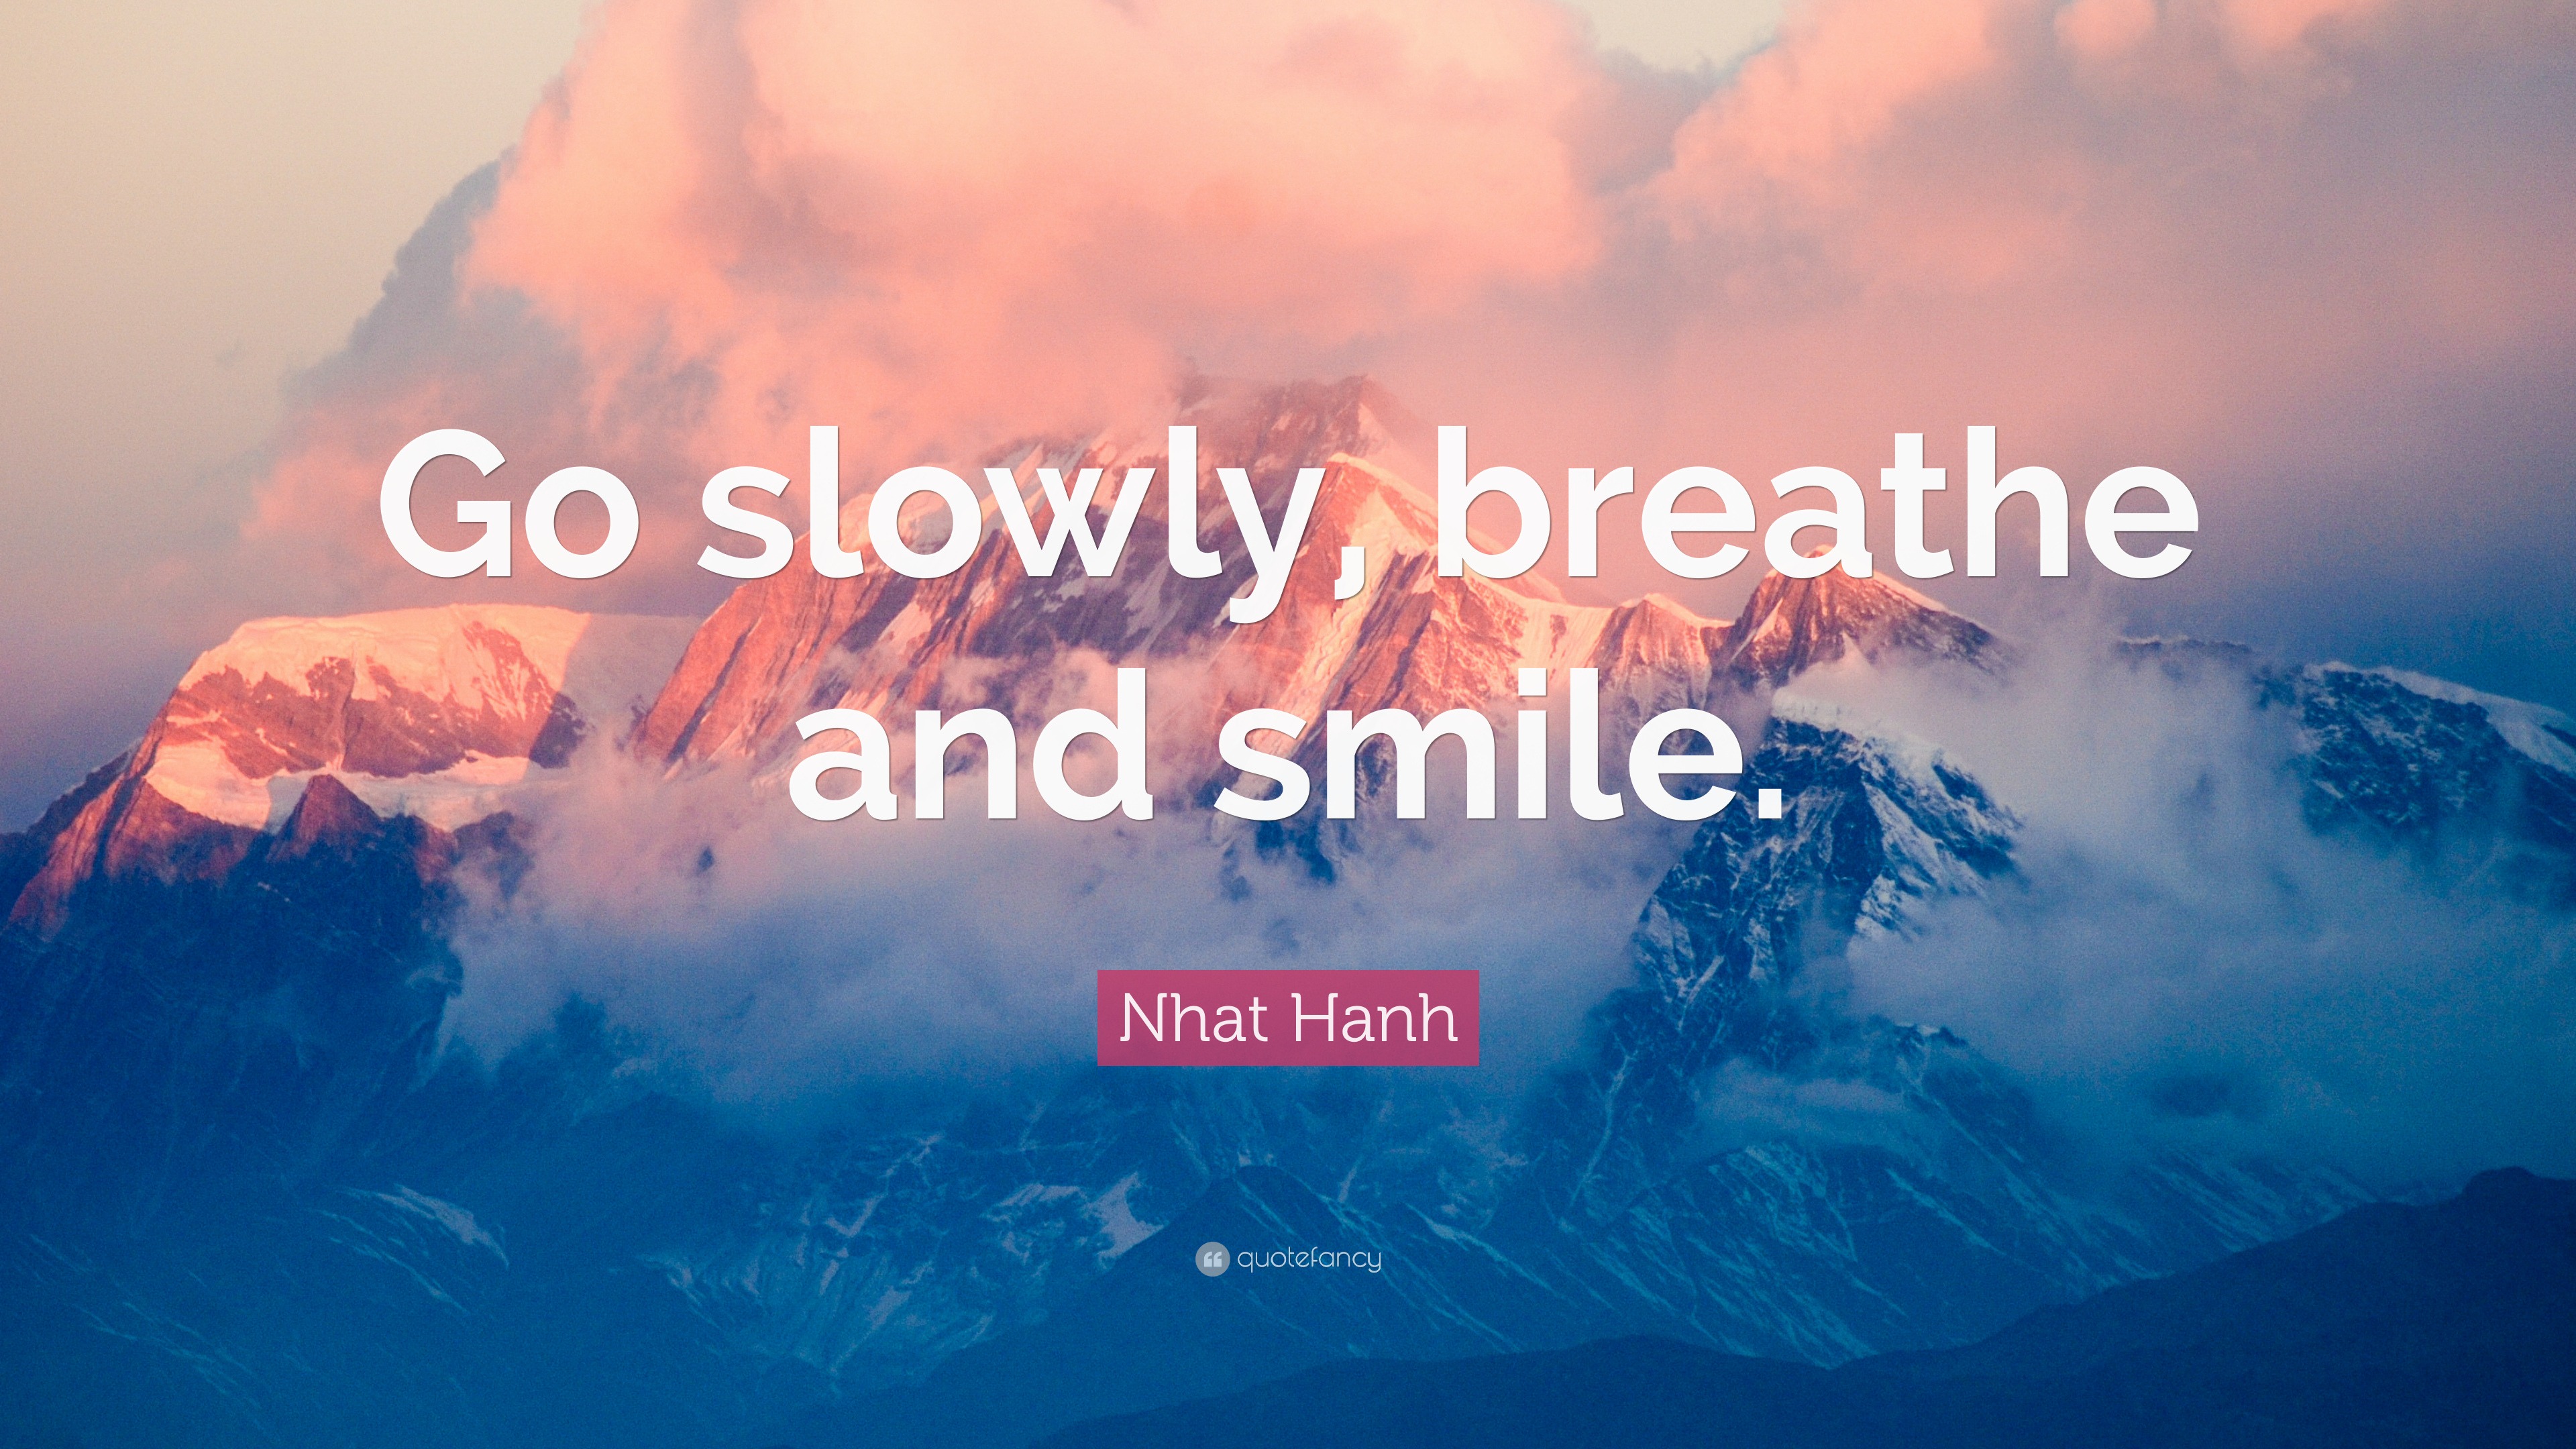 Project Happiness - Smile, breathe and go slowly.~Thich Nhat Hanh  #SundaySoul Challenge: In today's world, we're good at going fast and need  to practice going slow. This is why soulful practices, like